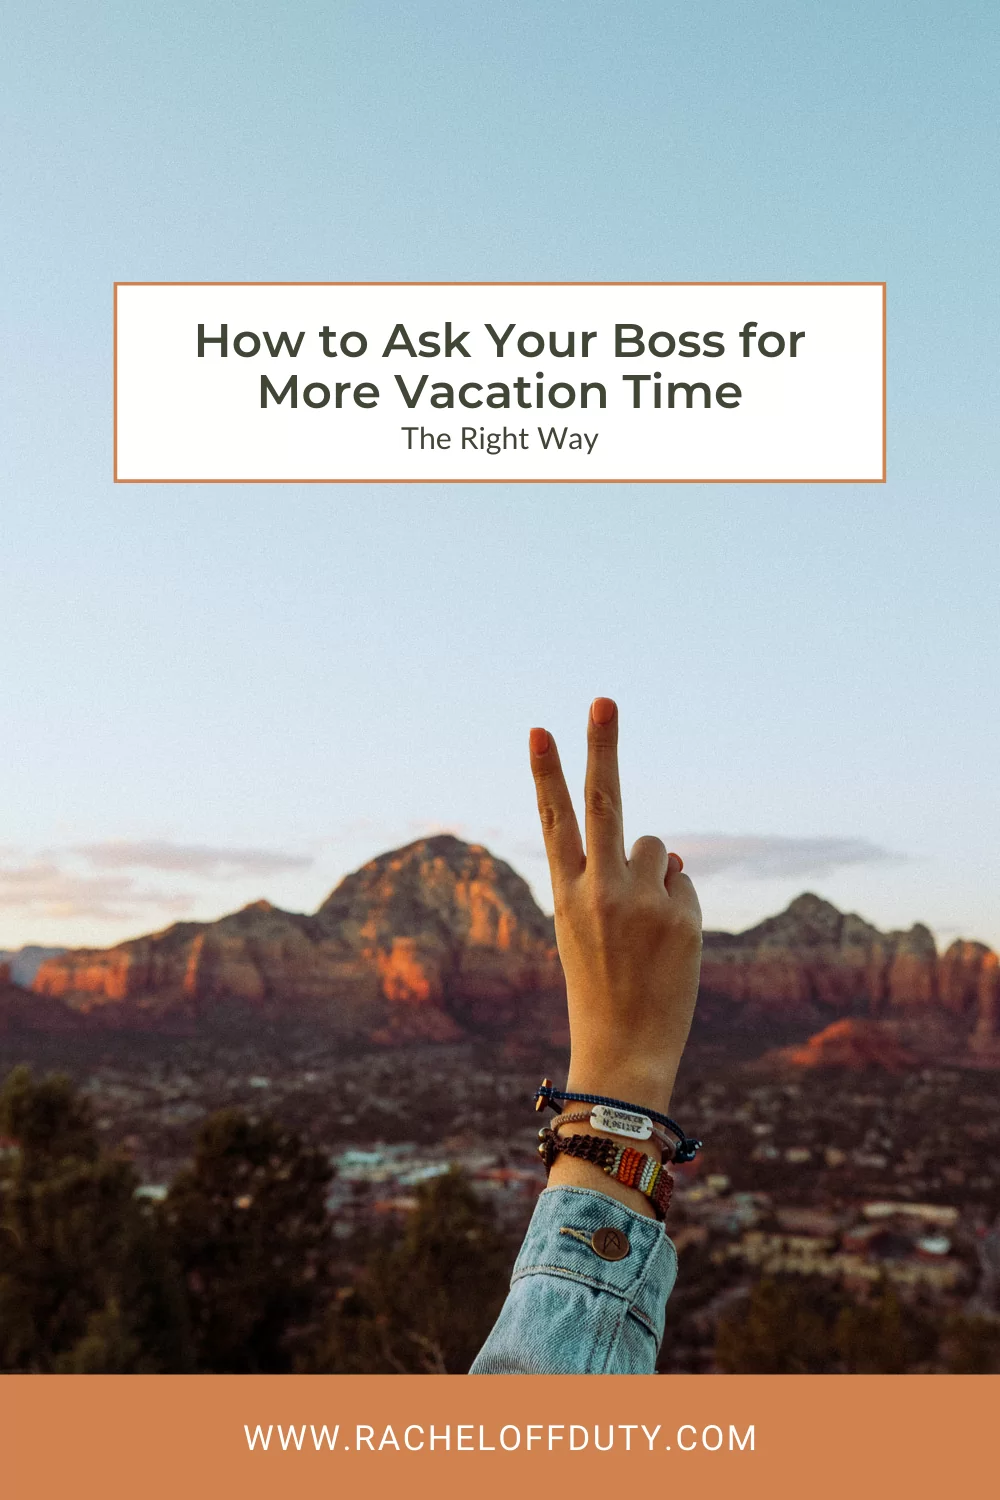 How to Ask Your Boss for More Vacation Time (The Right Way) - Rachel Off Duty